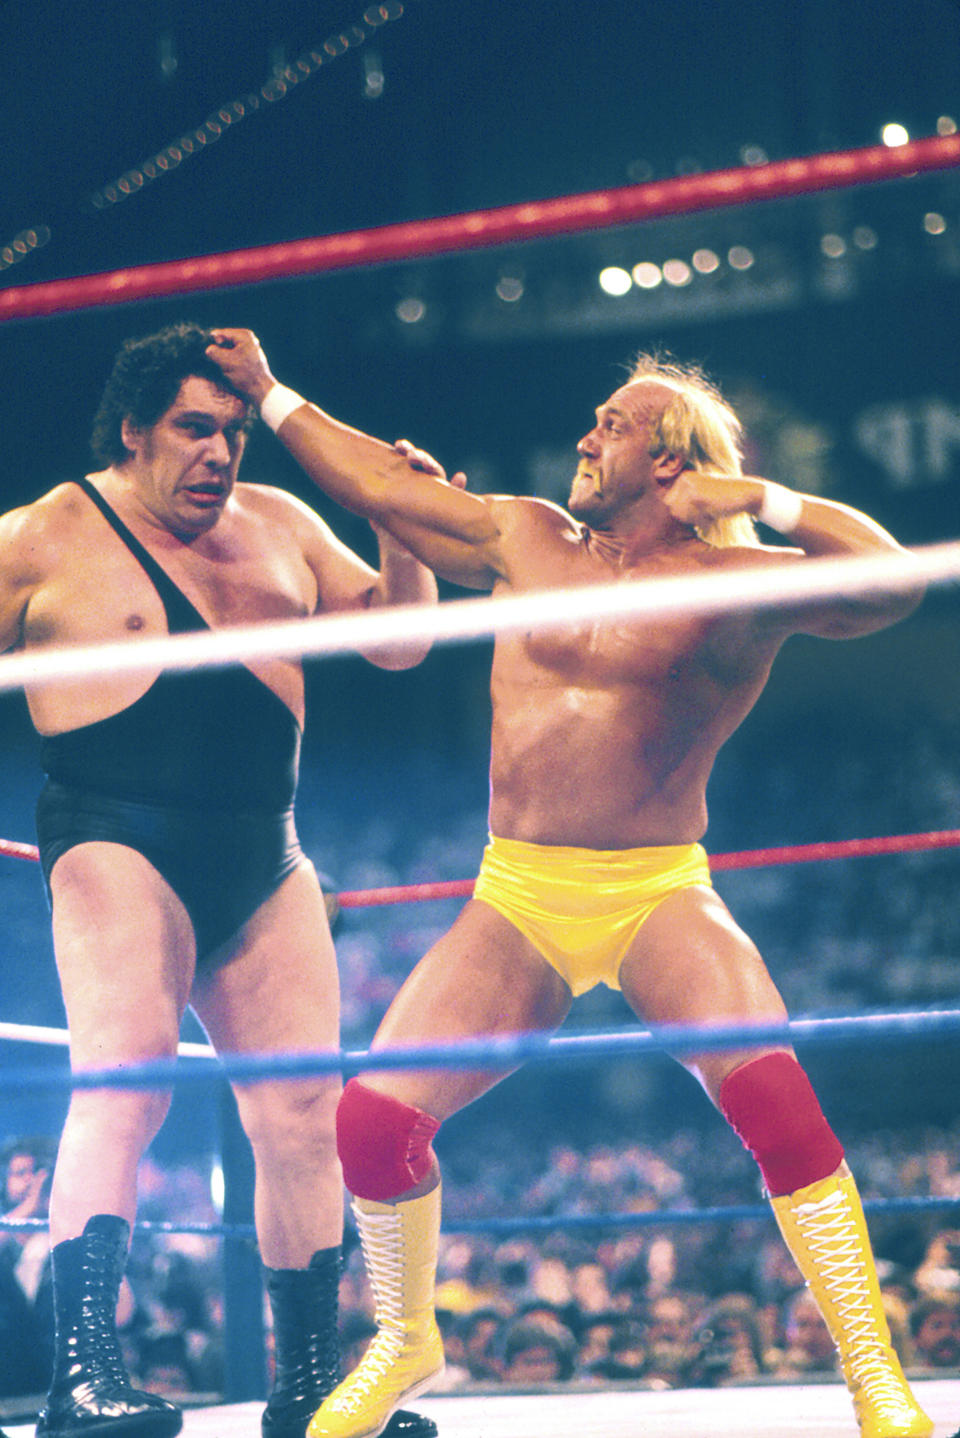 ATLANTIC CITY, NJ - March 27 1988: Hulk Hogan vs Andre the giant Wrestlemania Vl March 27 1988 at Historic Convention Hall in Atlantic City, New Jersey March 22 1988. (Photo by Jeffrey Asher/ Getty Images)